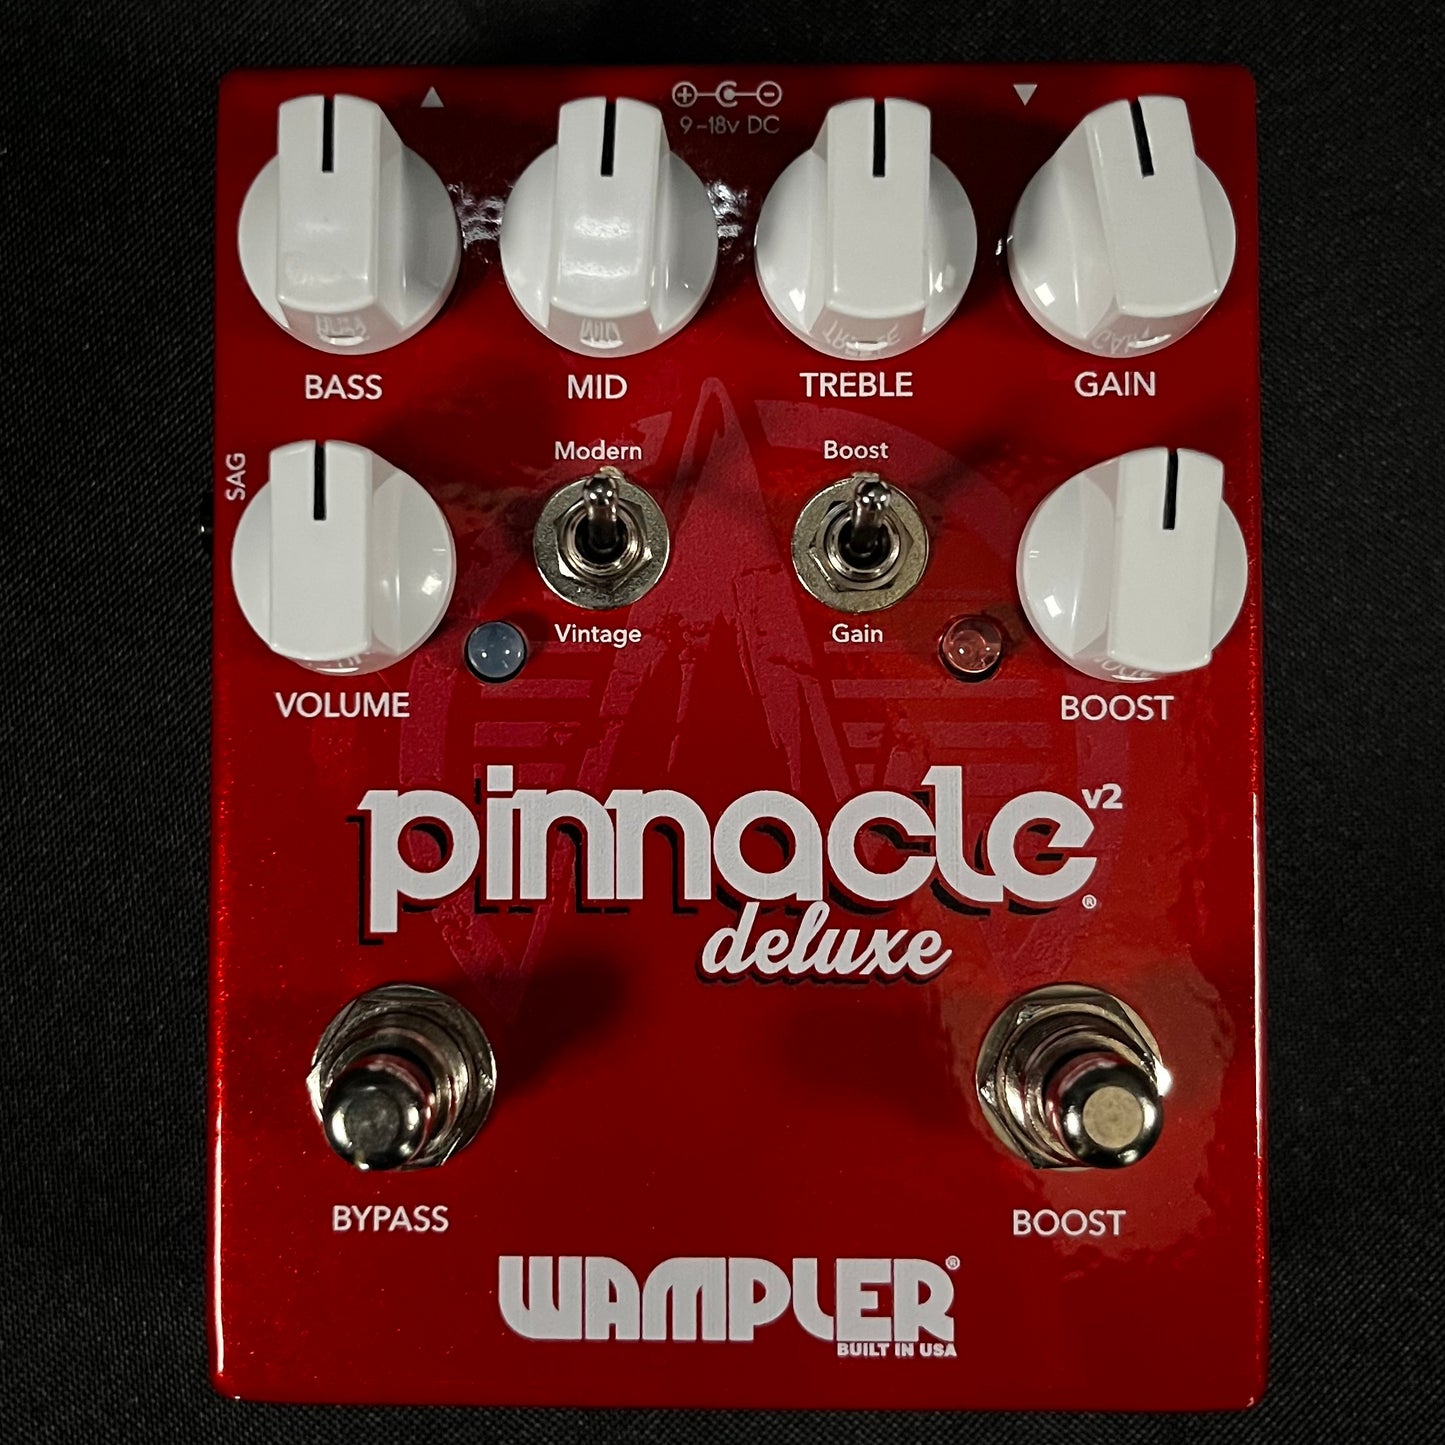 Top of Used Wampler Pinnacle Deluxe Overdrive Pedal TFW137